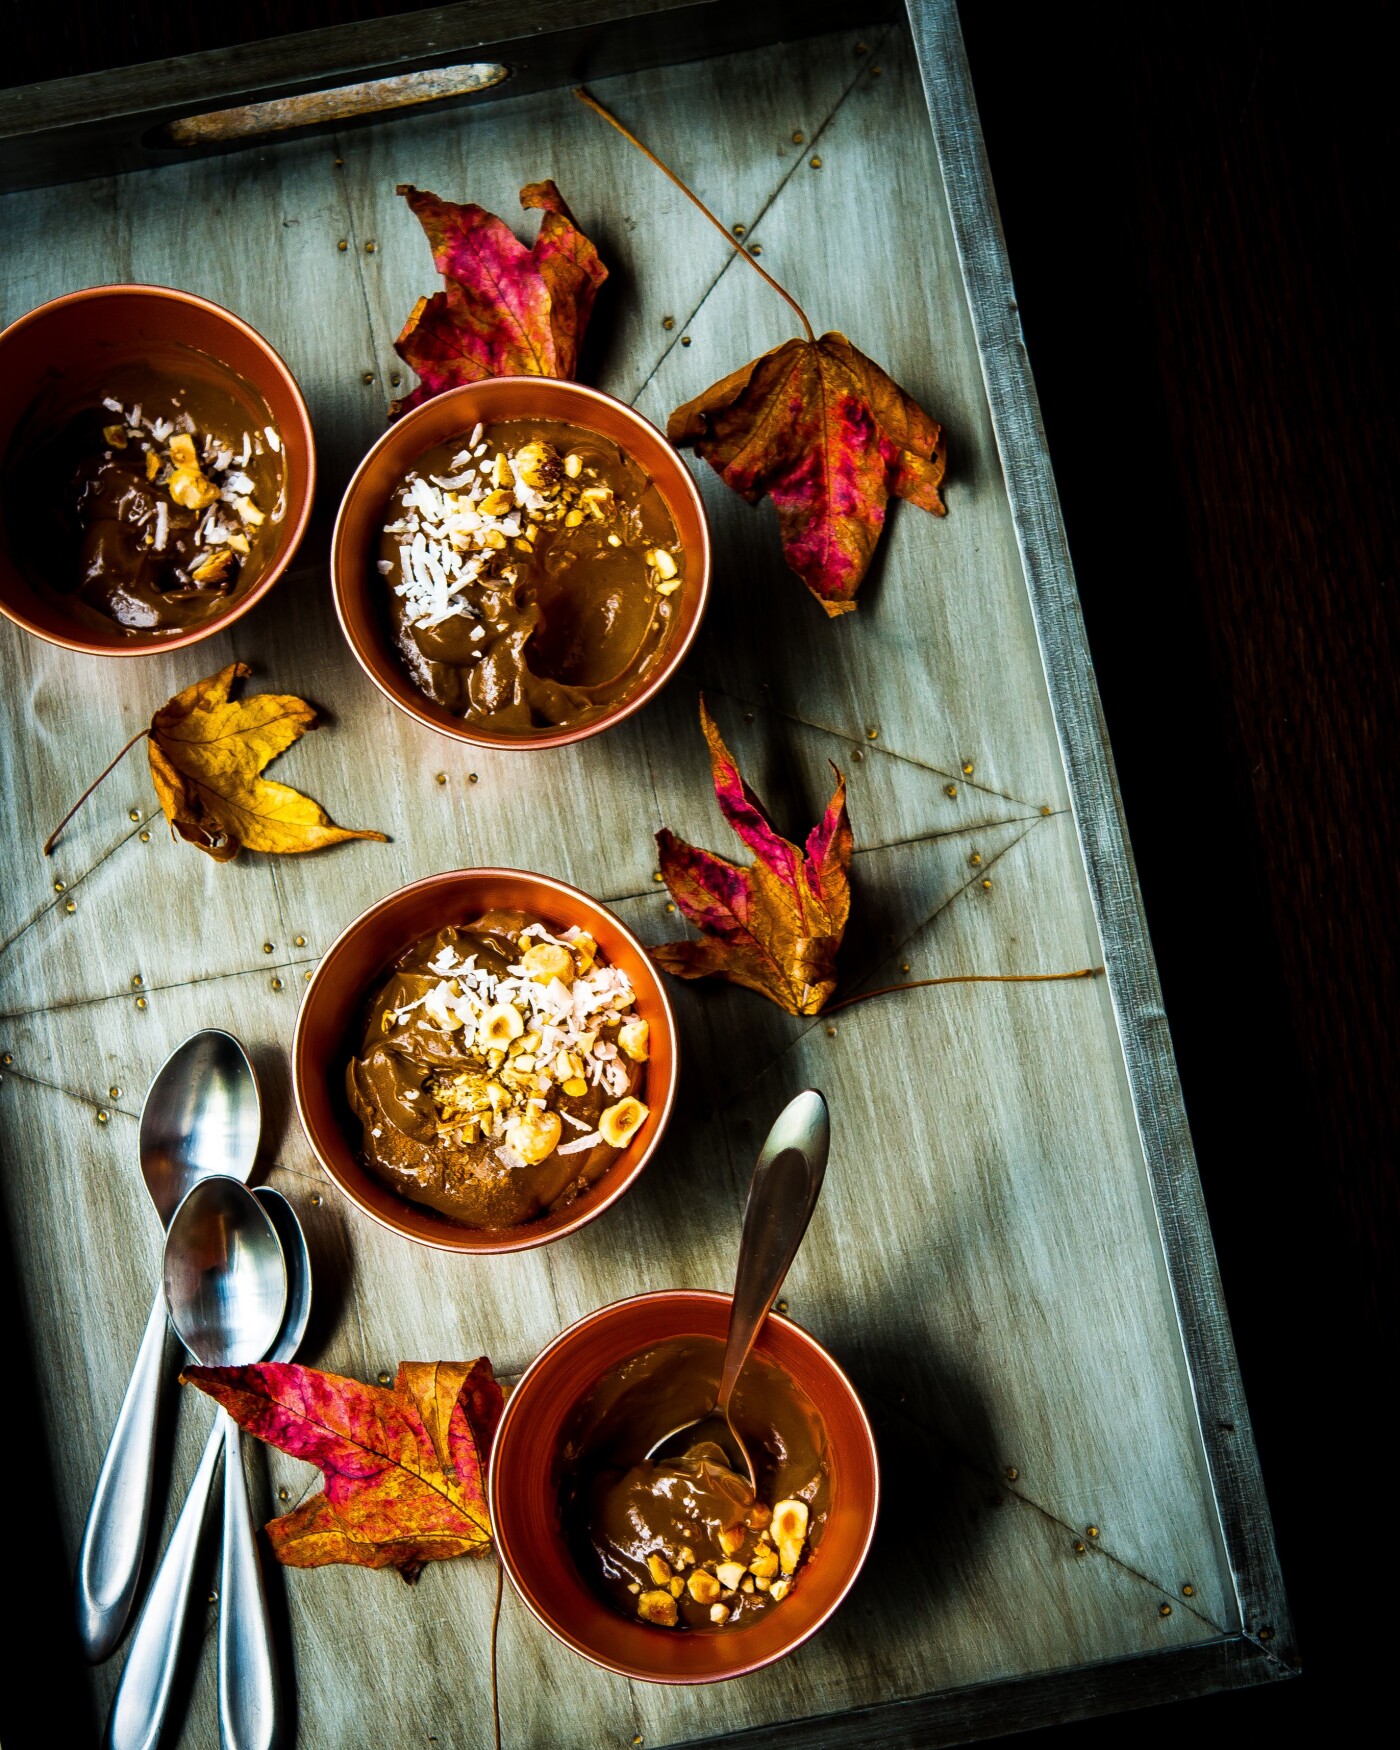 A wickedly scrumptious Mexican chocolate pudding made with healthy ingredients of ripe avocados, unsweetened cocoa, almond milk, vanilla extract, maple syrup and spiced with ground cinnamon, cayenne pepper and Maldon sea salt.  What could be a better way to enjoy this creamy and delectable dessert.  This image is styled with fall leaves and gray tones to accentuate the arrival of the cooler months.